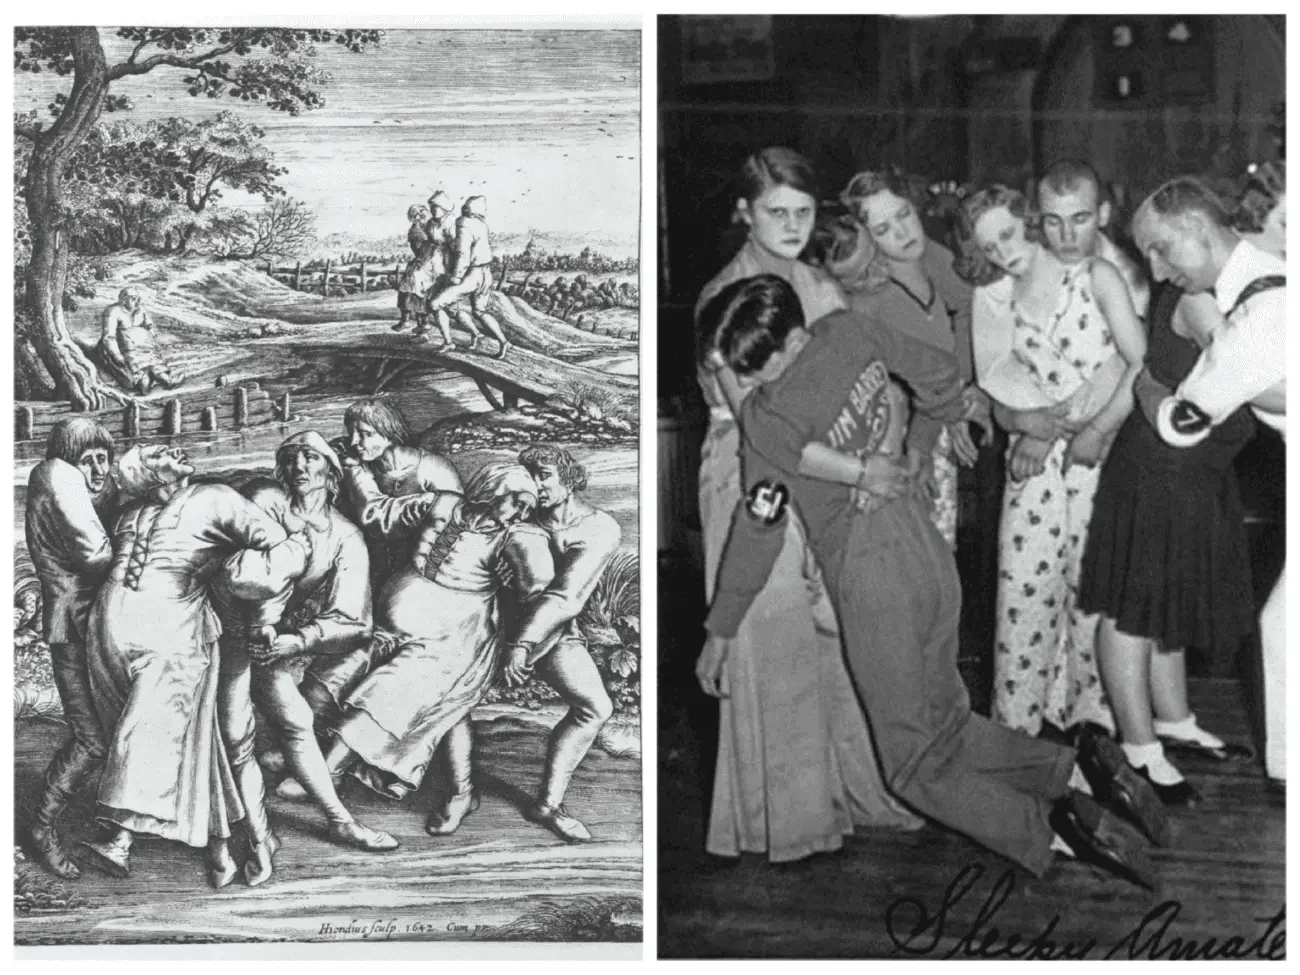 A dancing illness in the early 1600s and a 1930s dance marathon hold surprising similarities